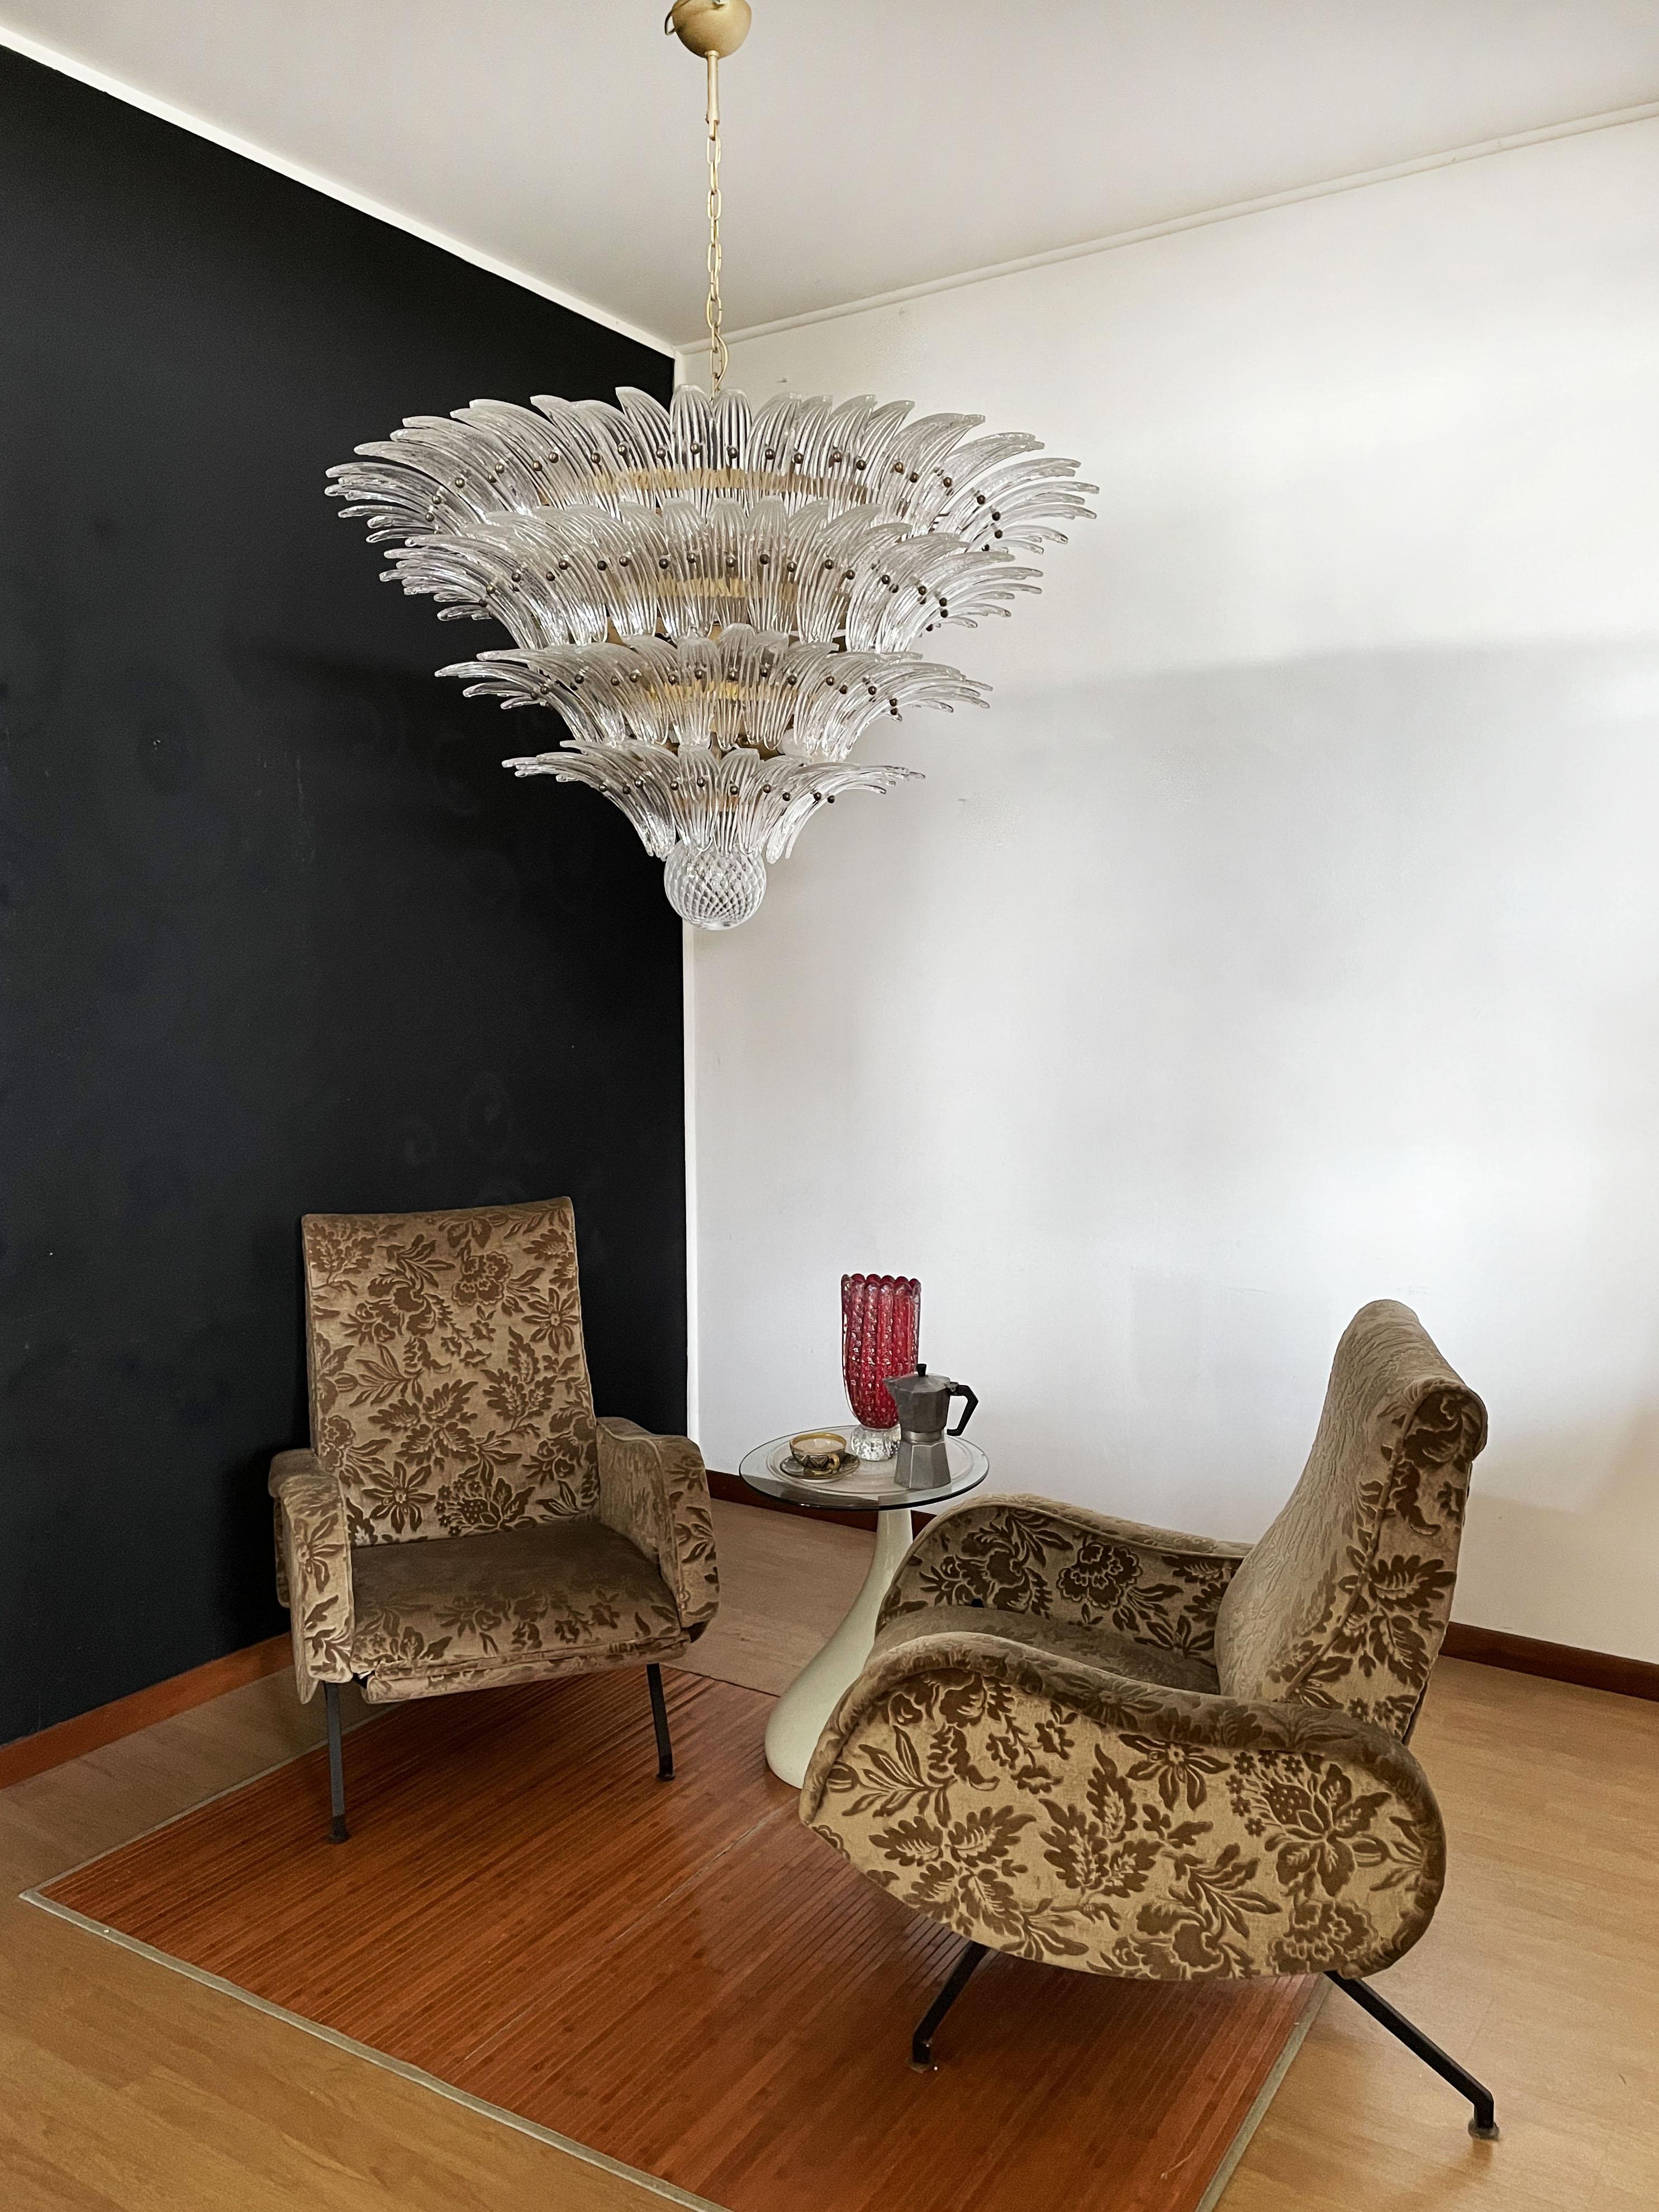 Palmette ceiling light made by 163 Murano trasparent glasses in a gold metal frame. Murano blown glass in a traditional way. Structure in gold colored metal.
Period:	1980's
Dimensions: 55.10 inches (140cm) height with chain; 31.50 inches (80 cm)